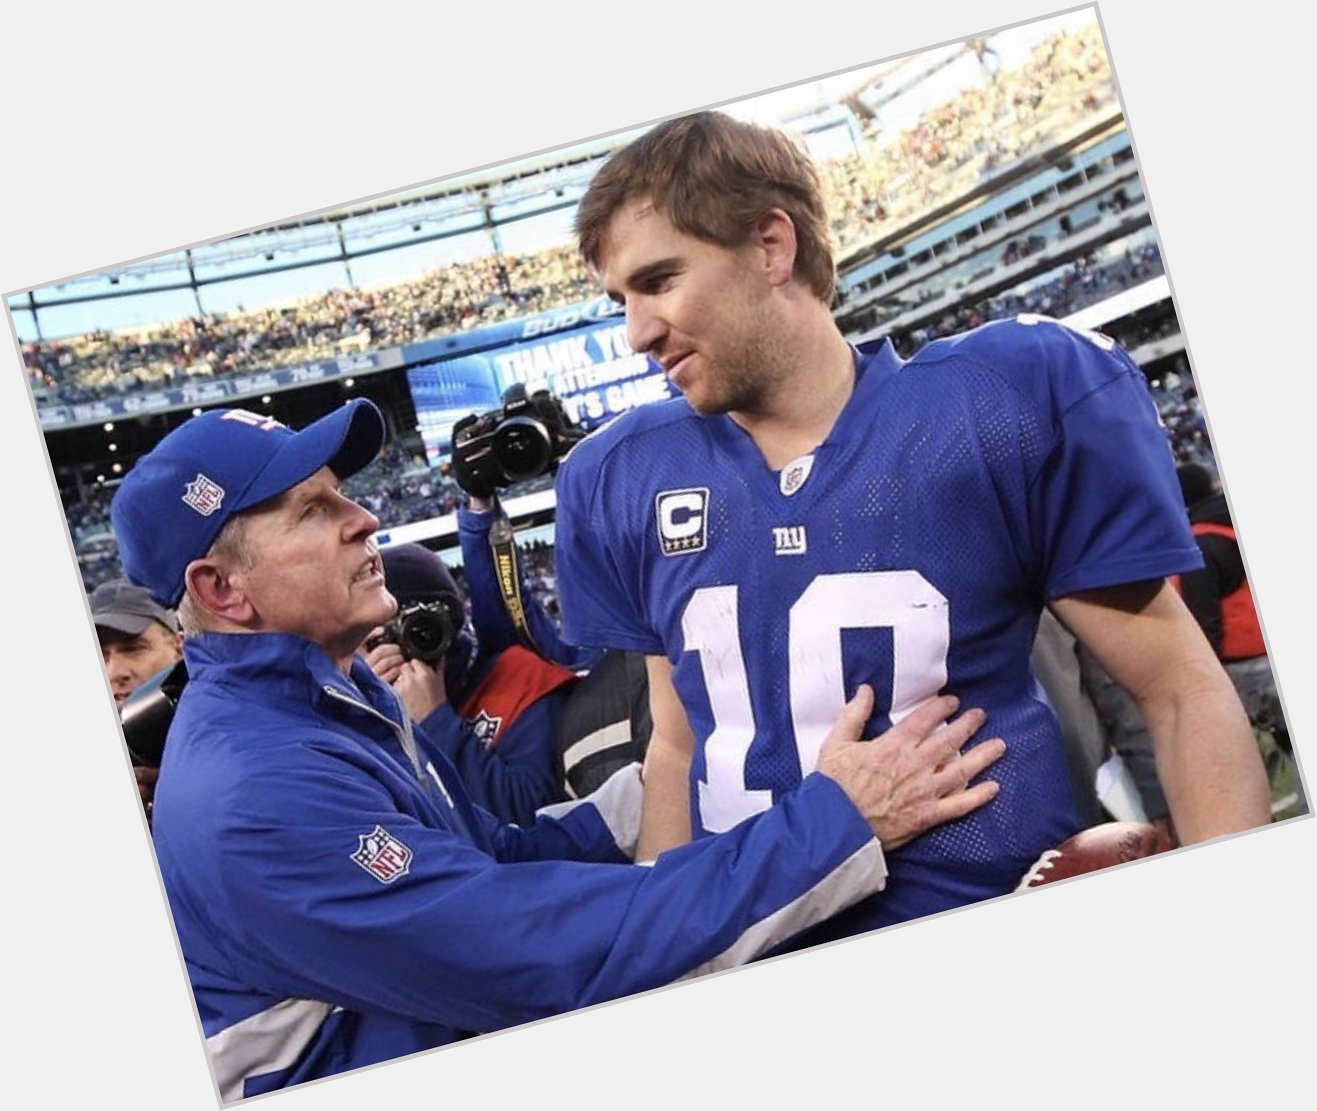 Happy Birthday to Tom Coughlin!! The Man, the Myth, the Legend. 